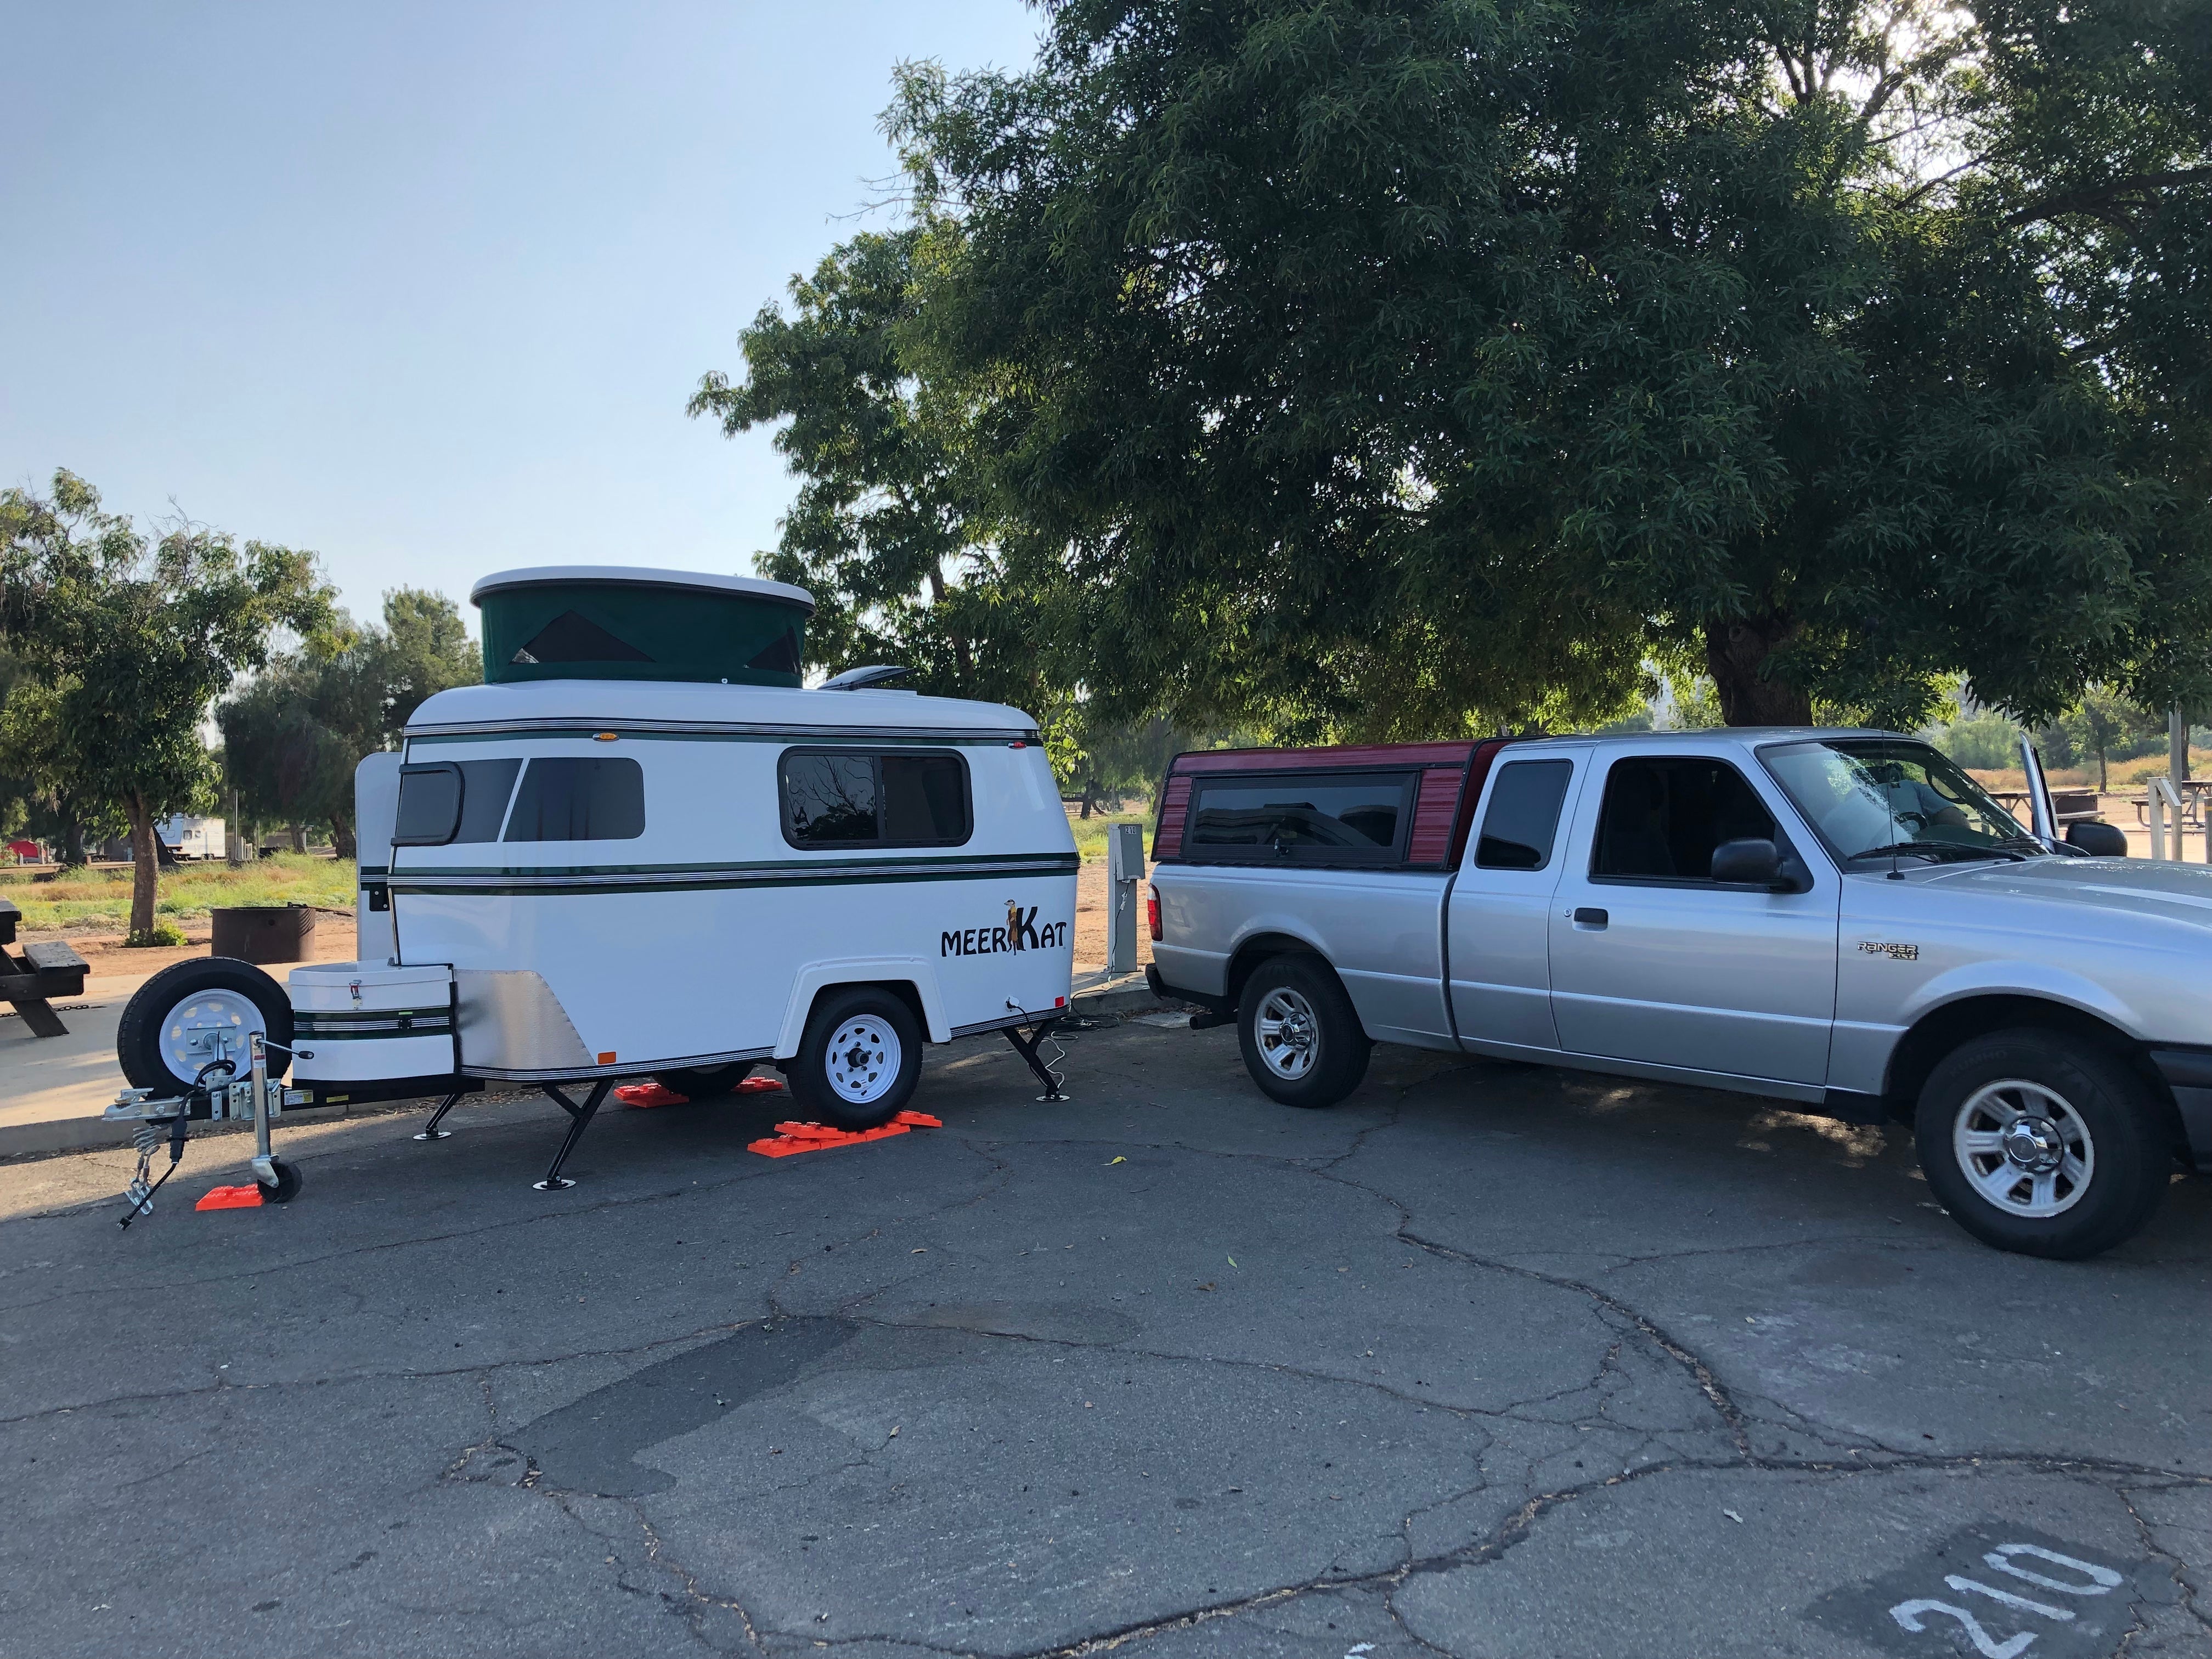 Parking lot camping, zillions of squirrels!